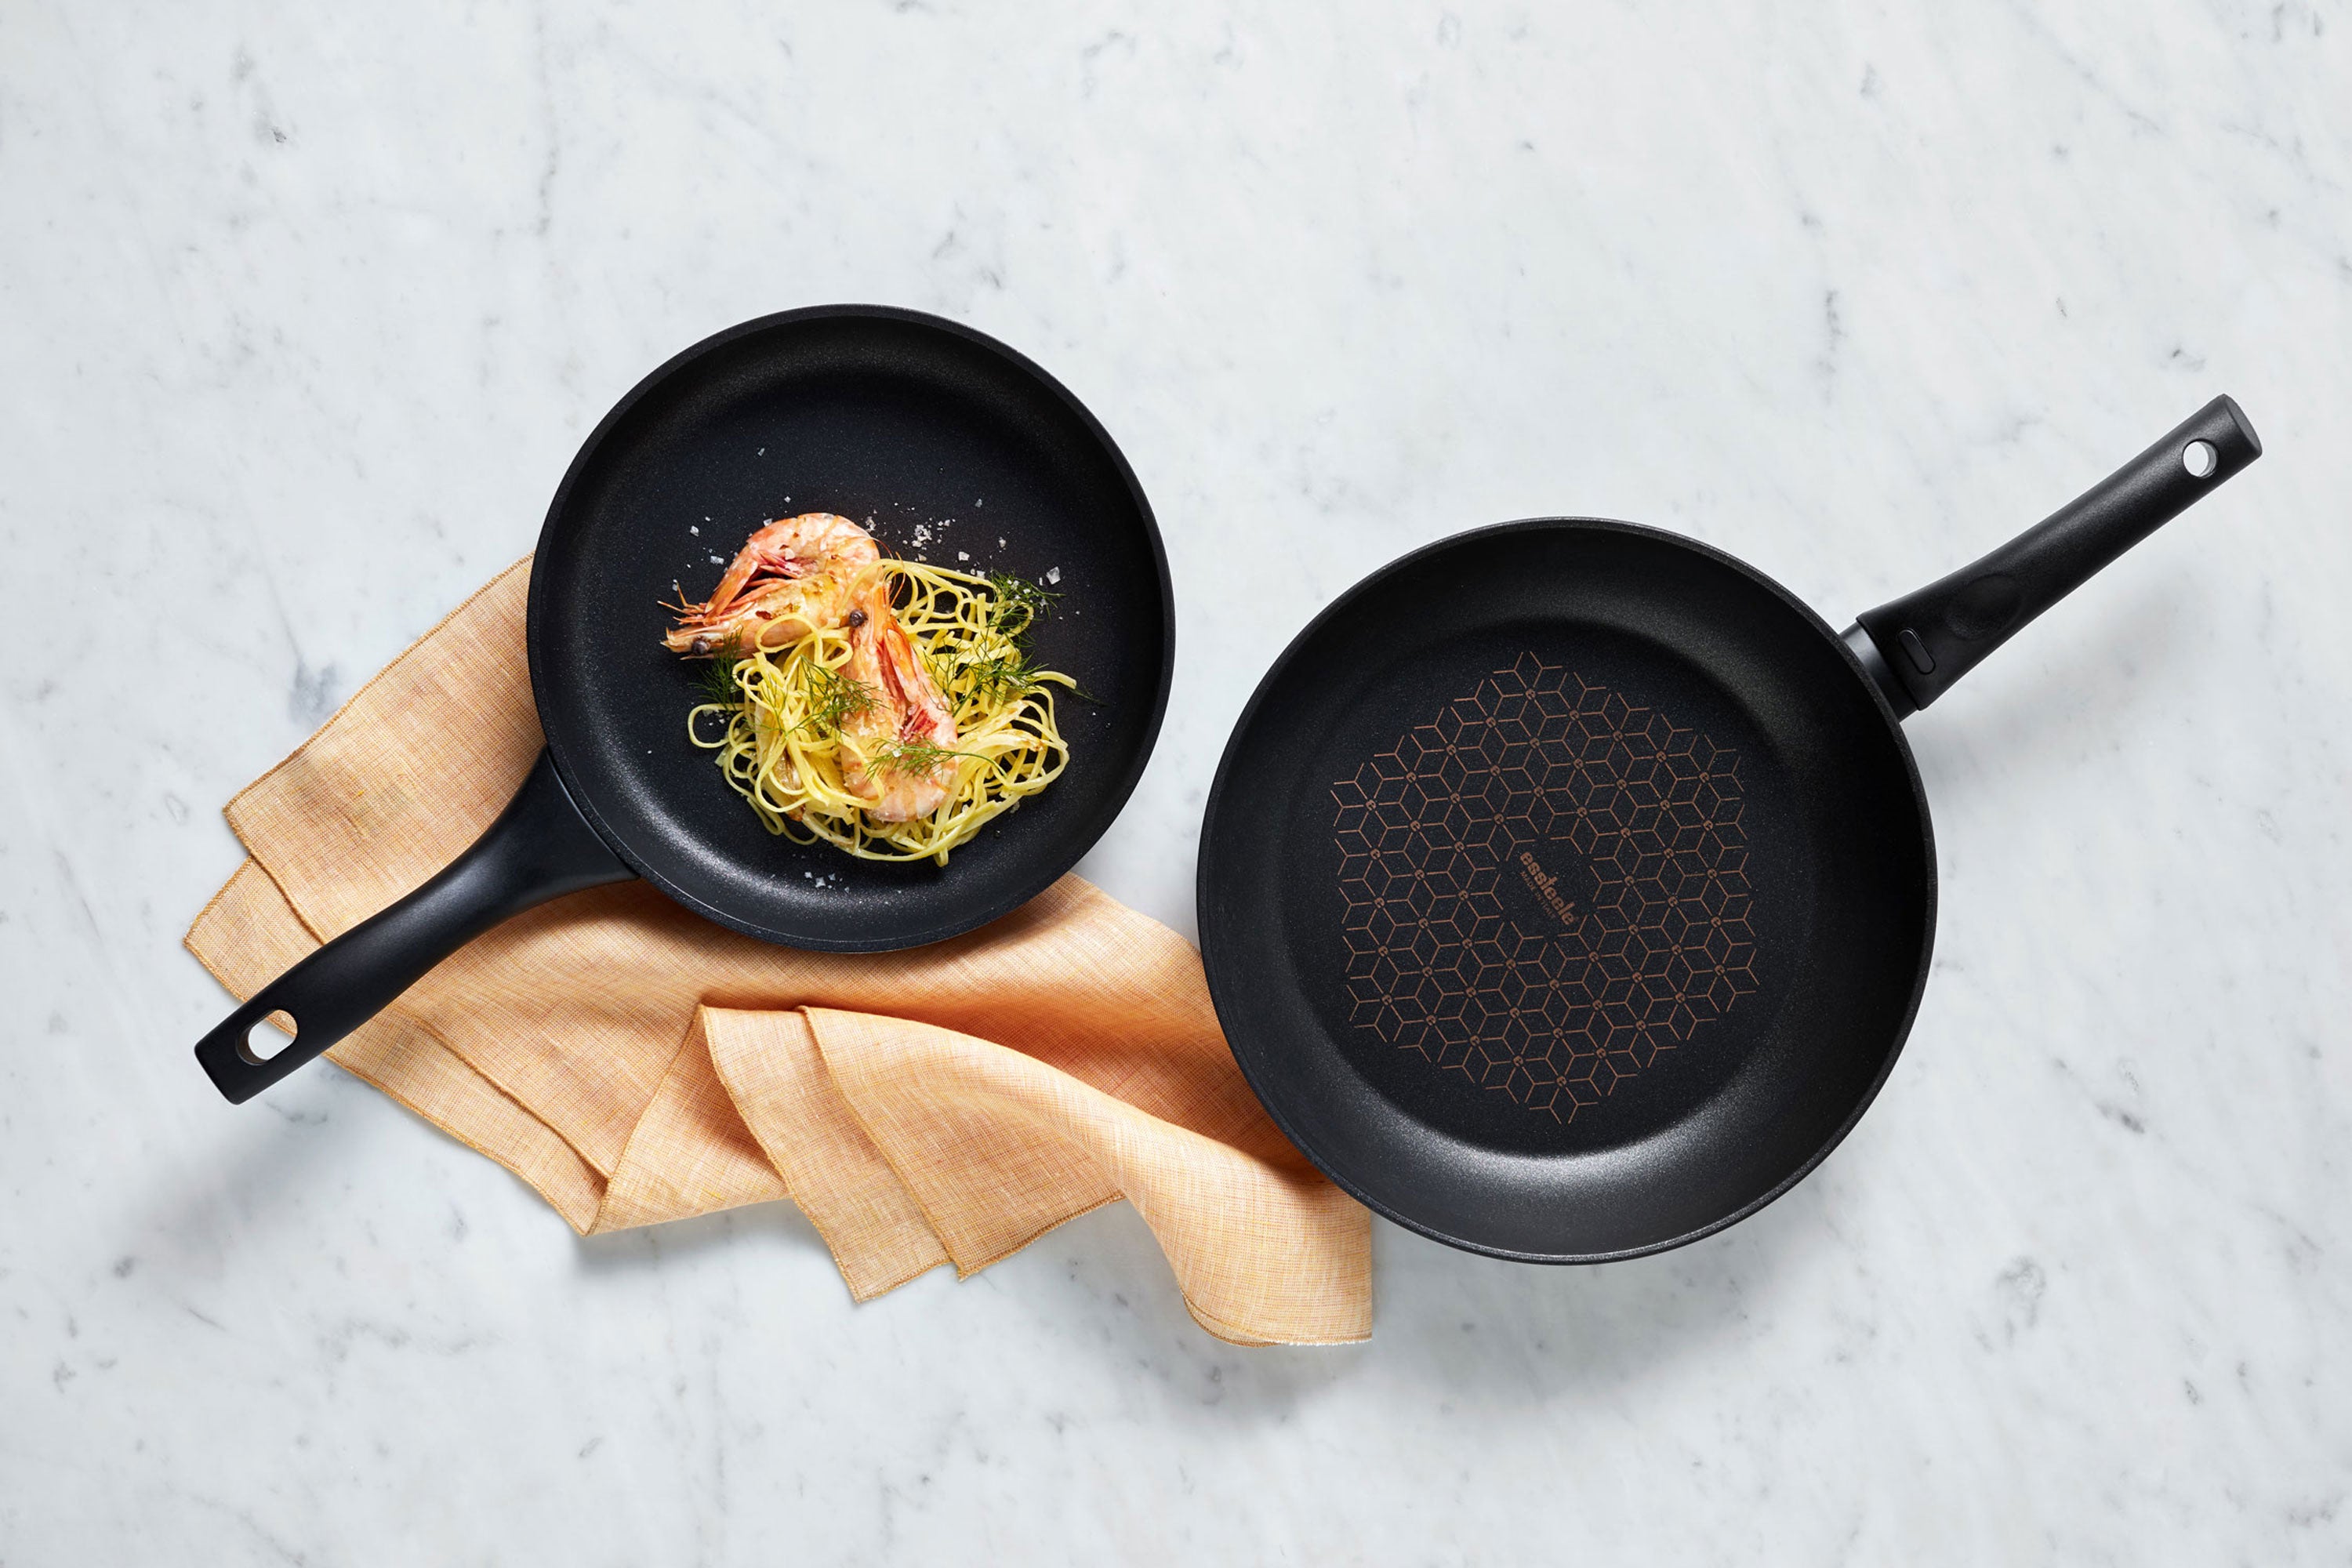 Saute Pan vs Skillet: What's the Difference Between These Pans